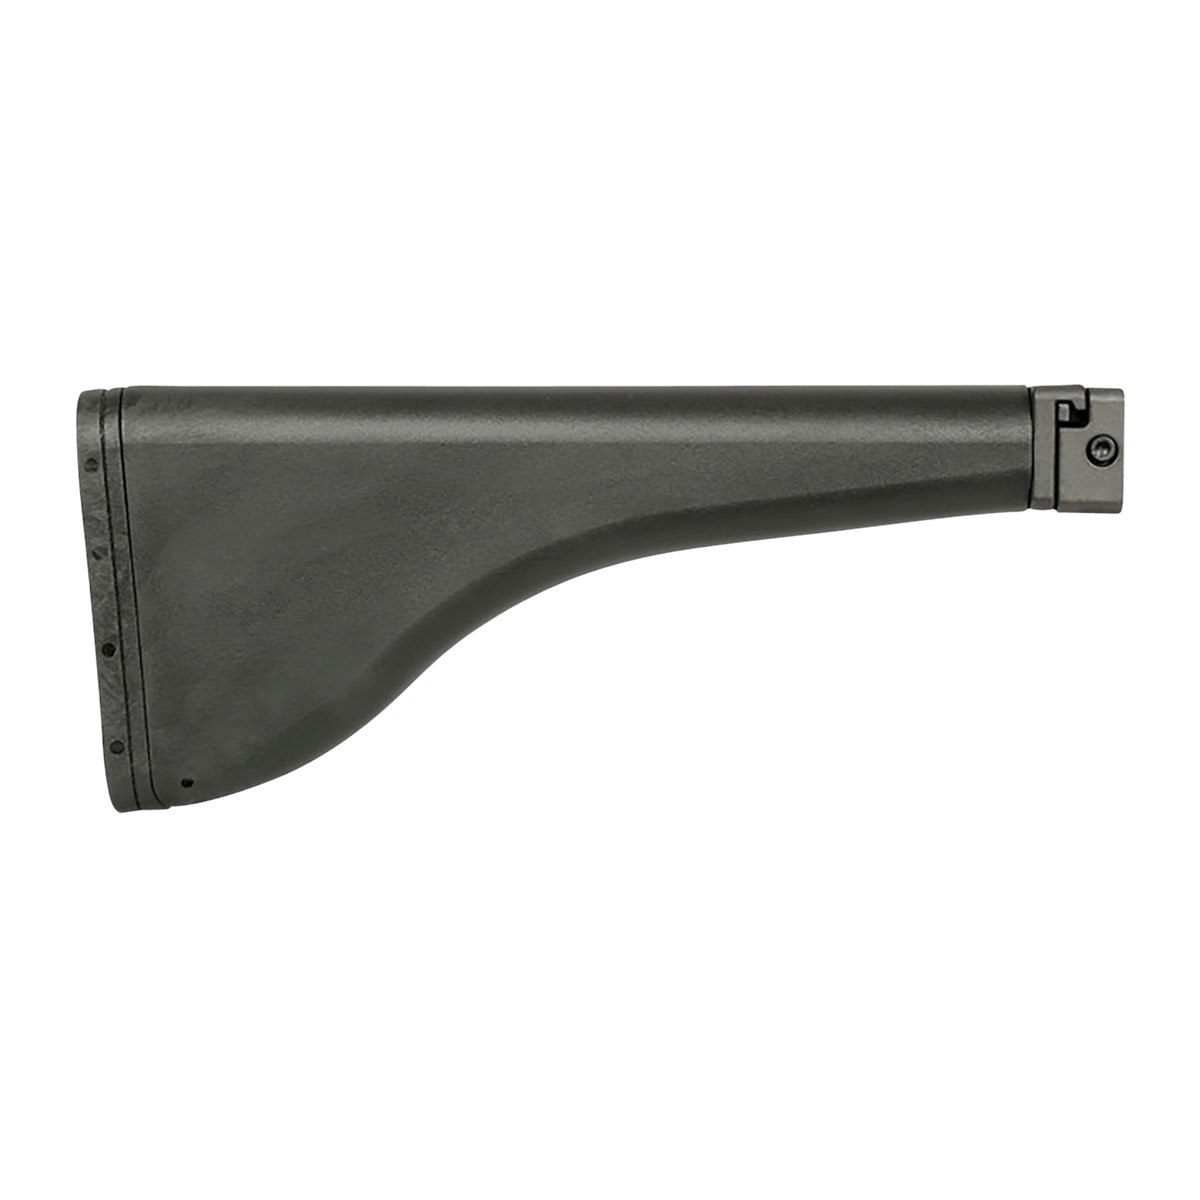 MIDWEST INDUSTRIES, INC. - AR-15 SIDE FOLDING TRAPDOOR STOCK